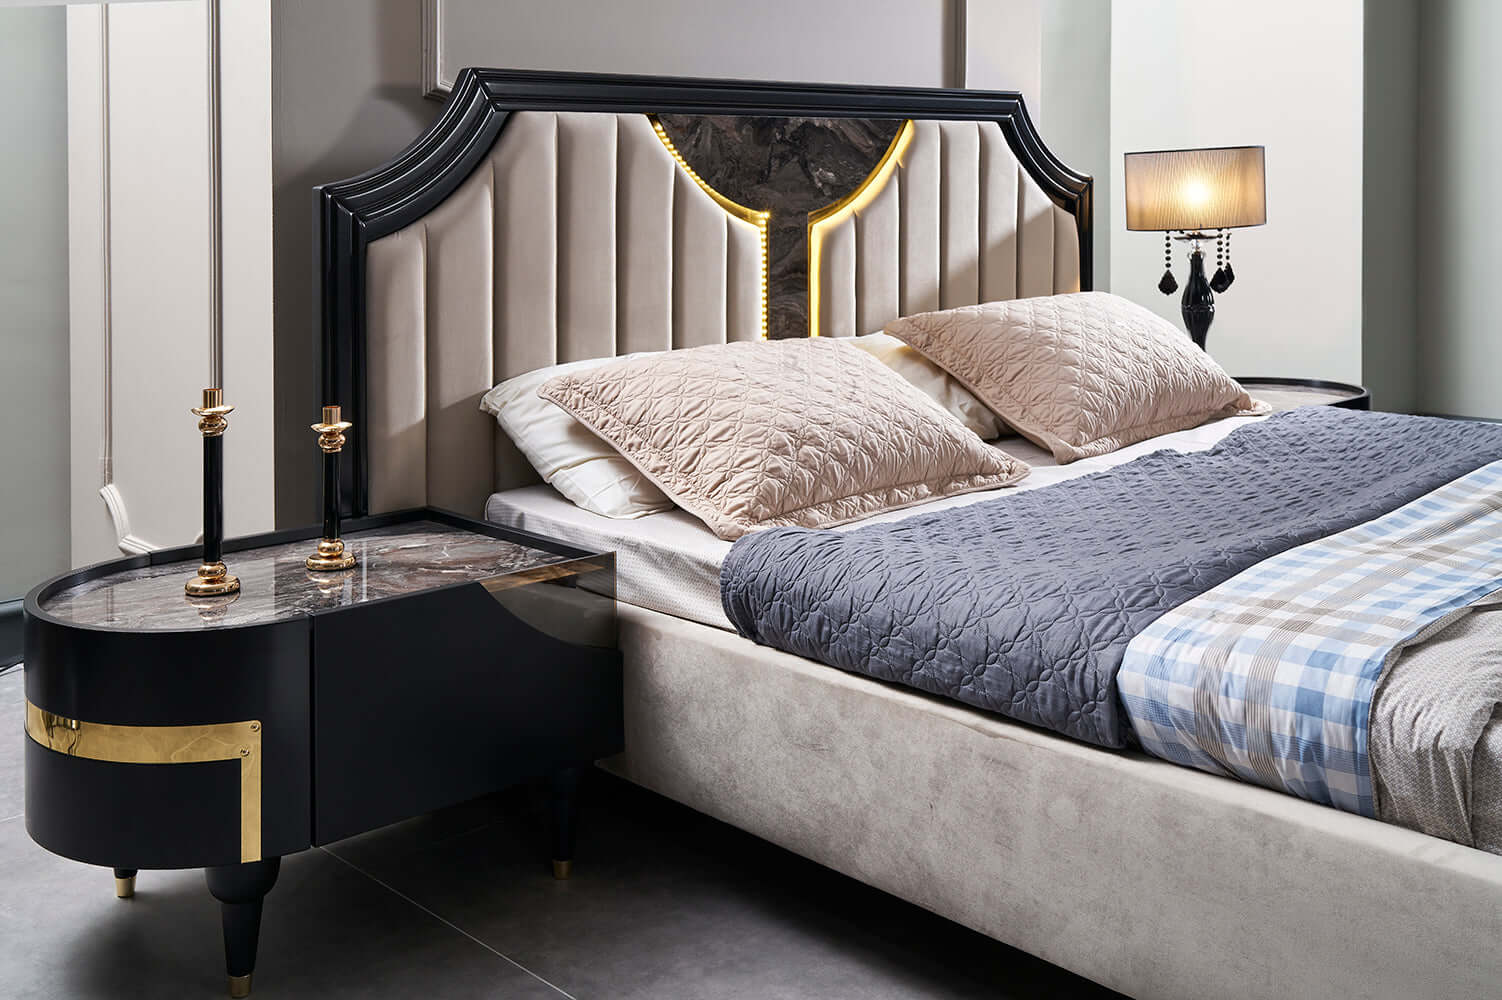 alt= Modern bedroom with a large bed, stylish dark wardrobe, vanity table with mirror, and elegant gray and beige decor.